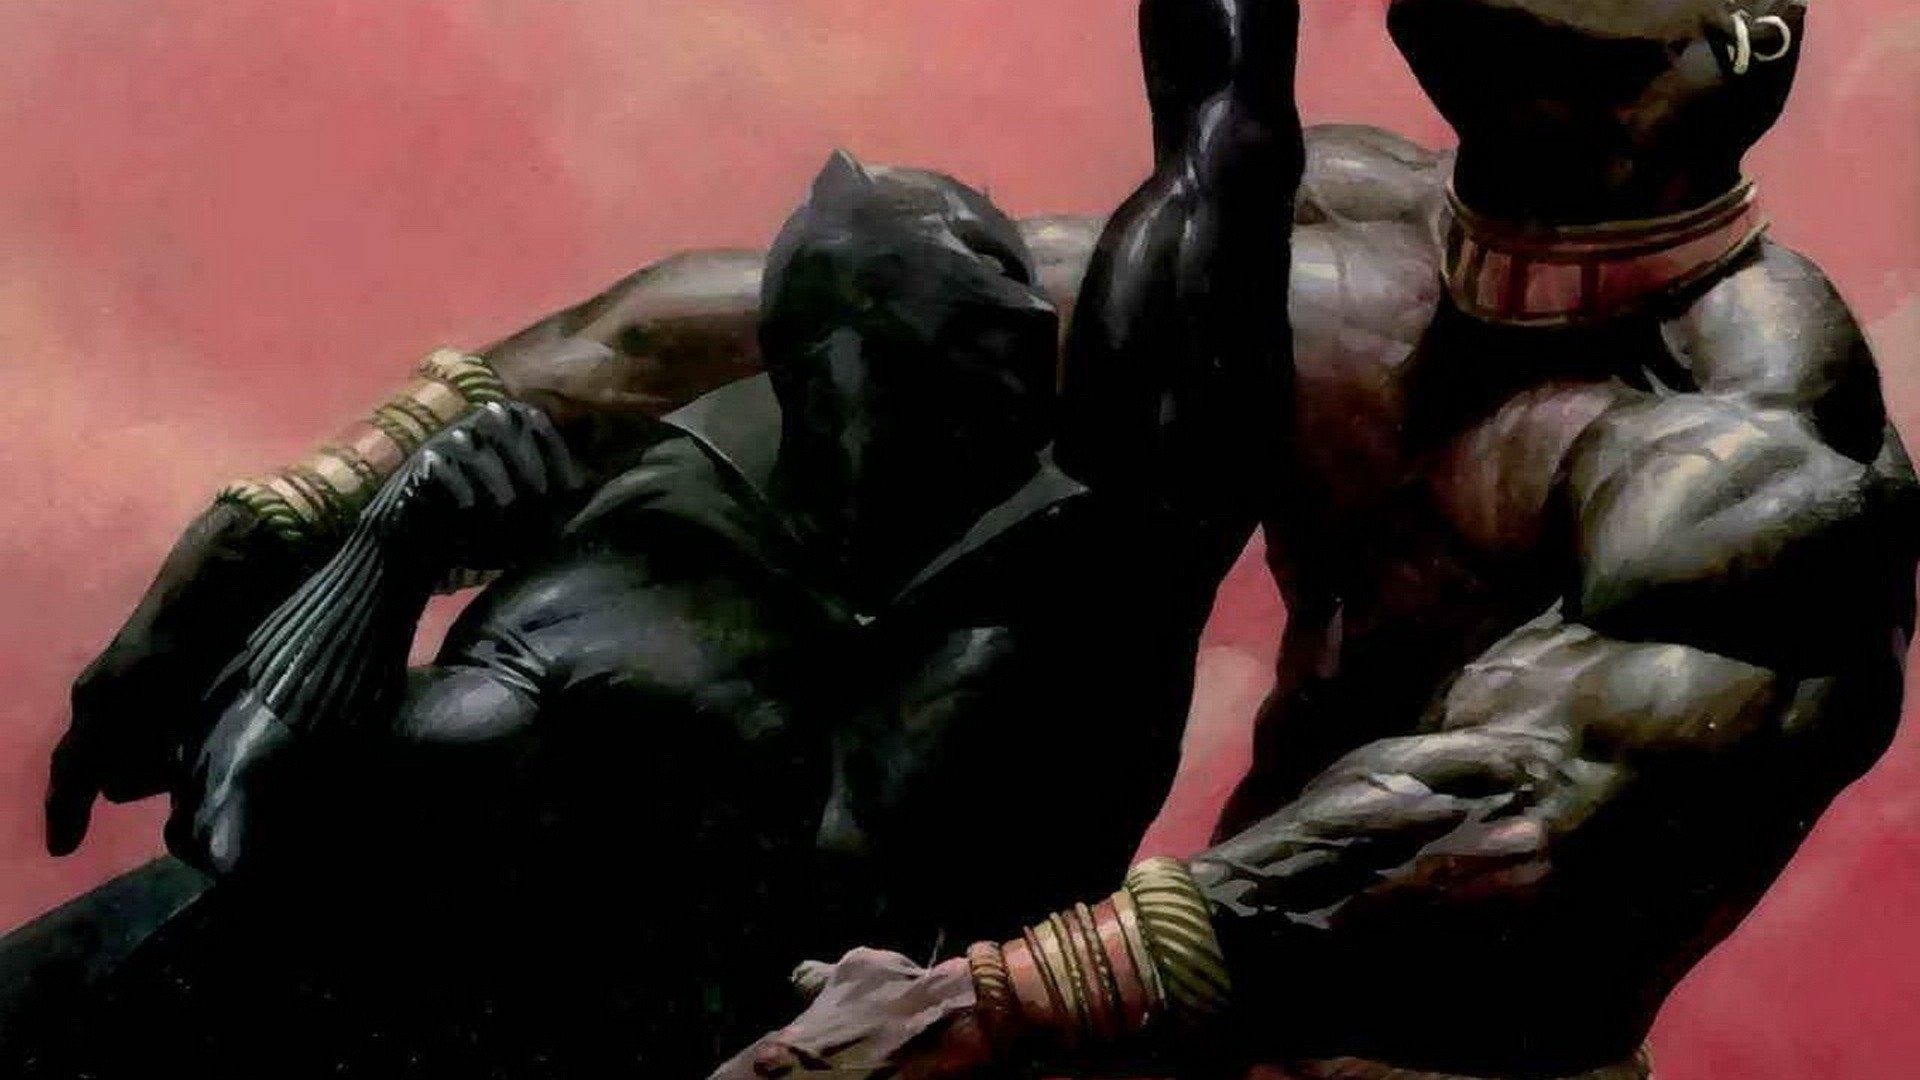 Black Panther Marvel Wallpapers ①